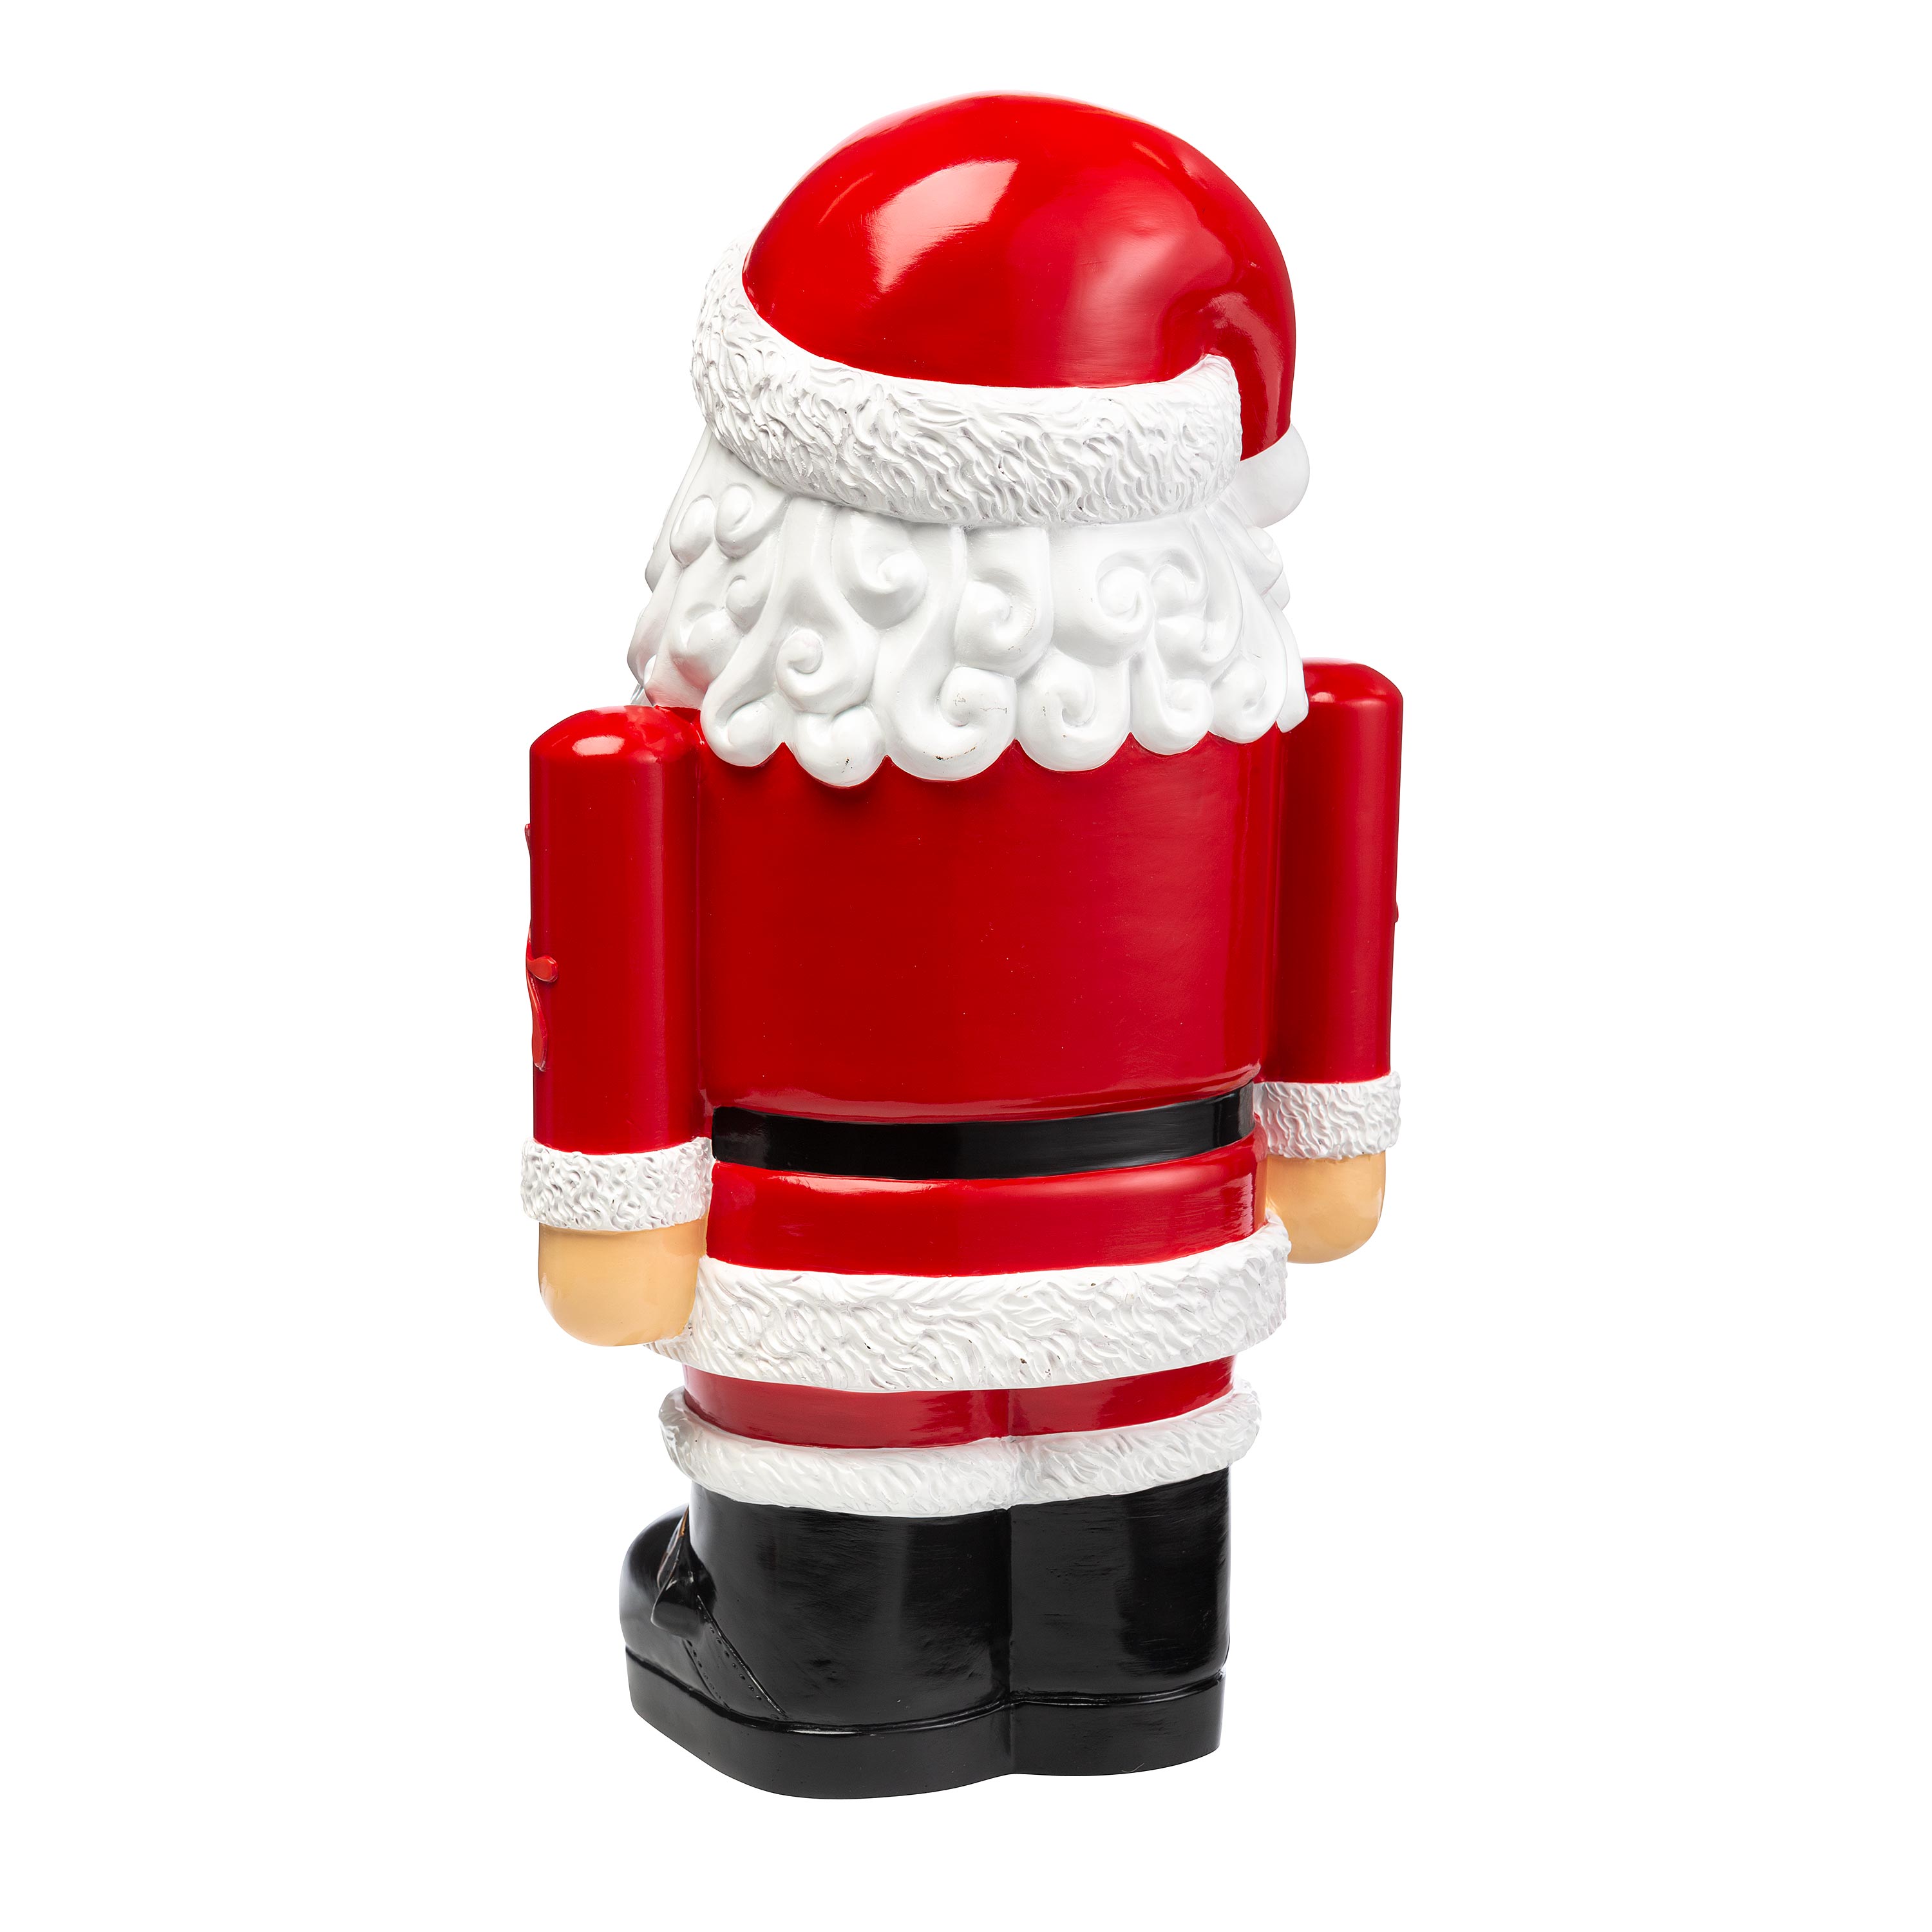 Indoor/Outdoor Lighted Santa Claus Shorty Statue